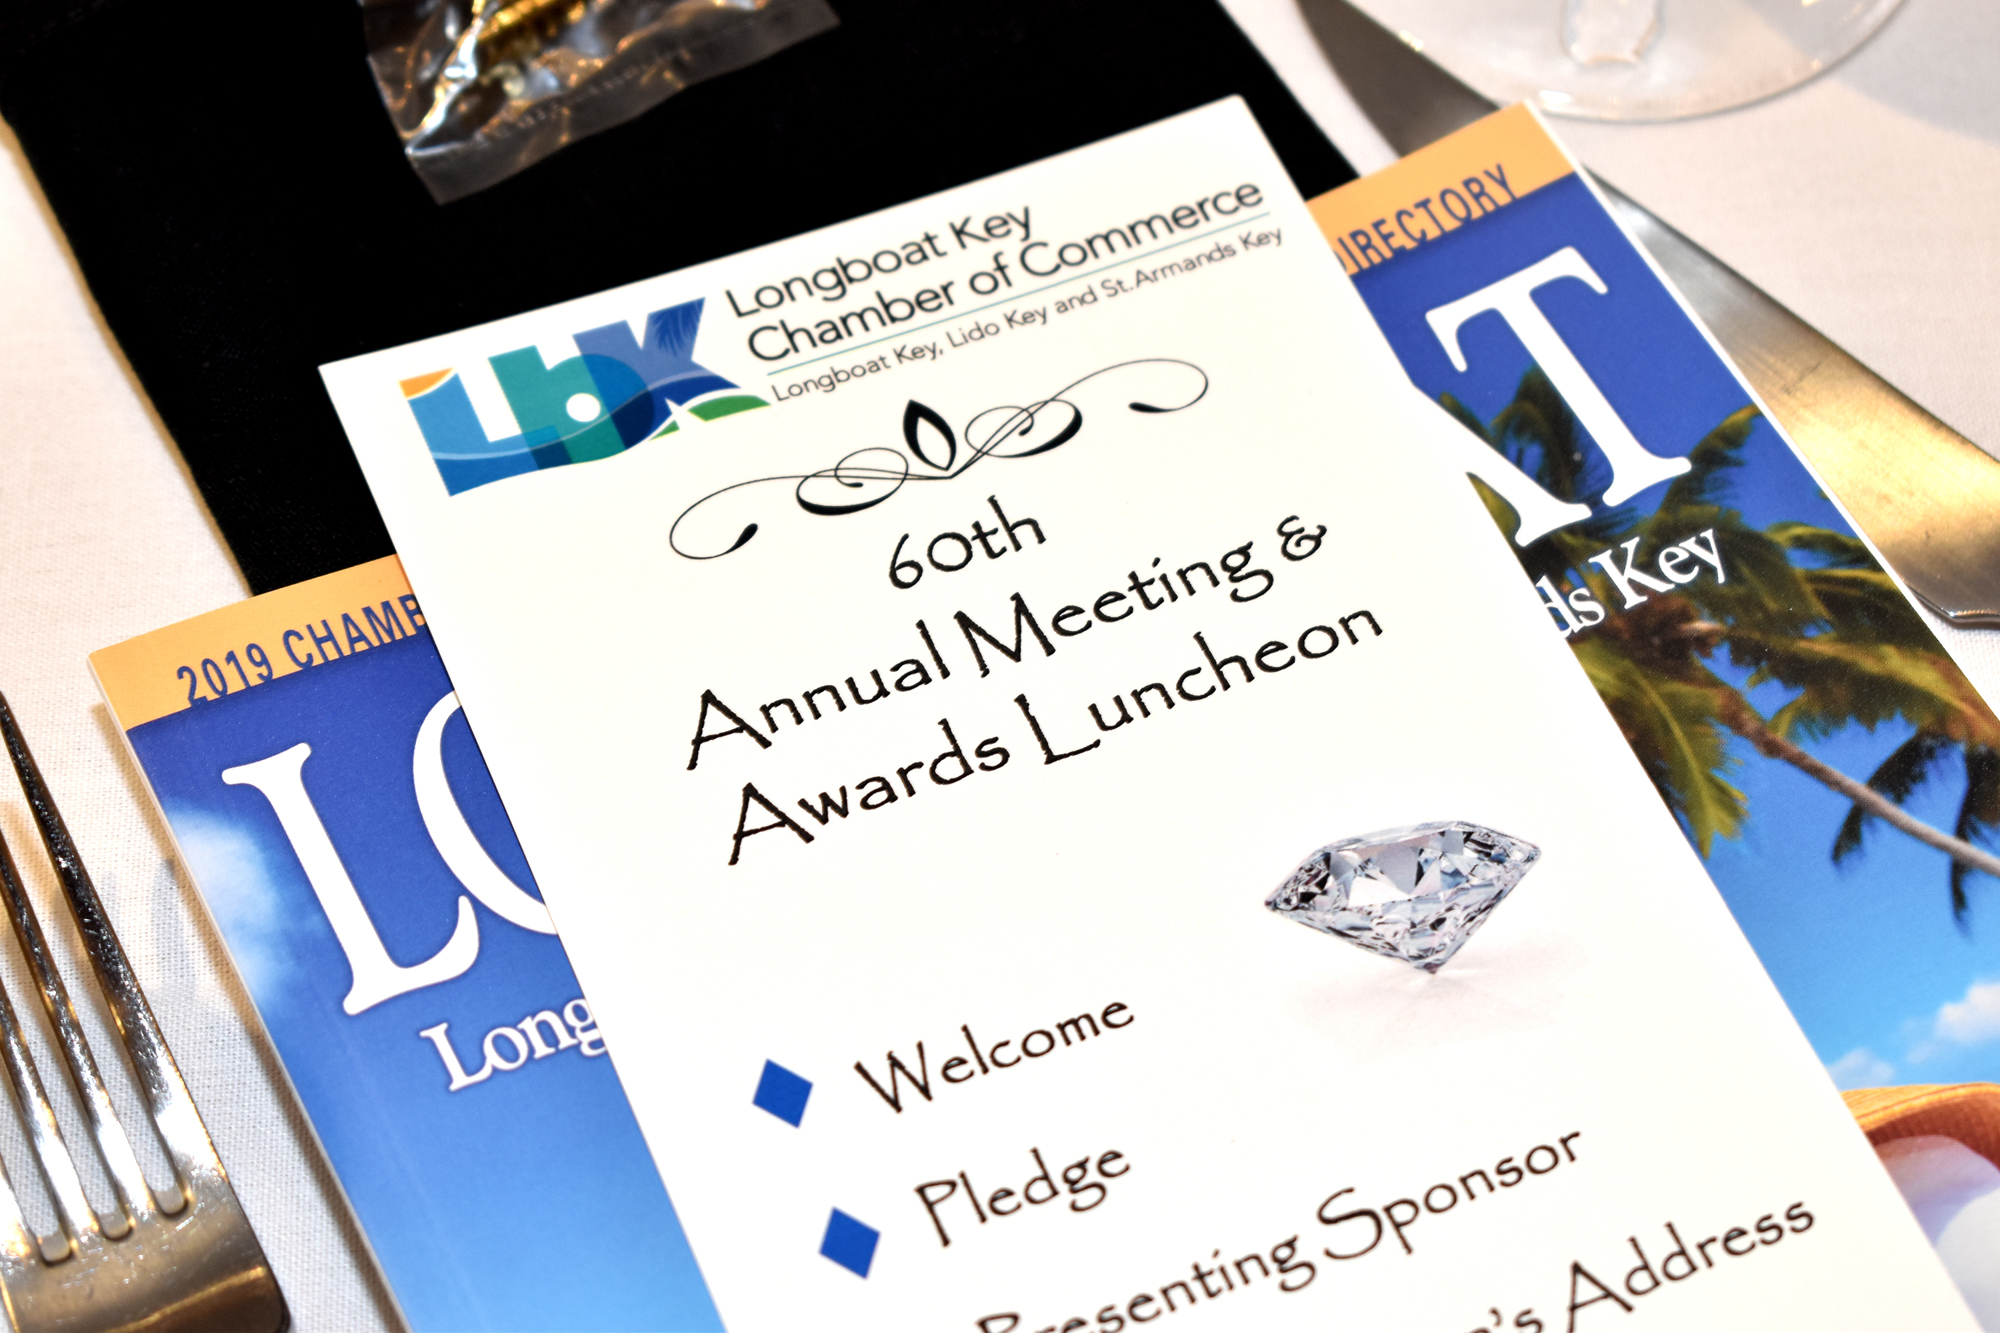 The Longboat Key Chamber of Commerce celebrated its 60th annual meeting and awards luncheon a week ago at the Zota Beach Resort.  